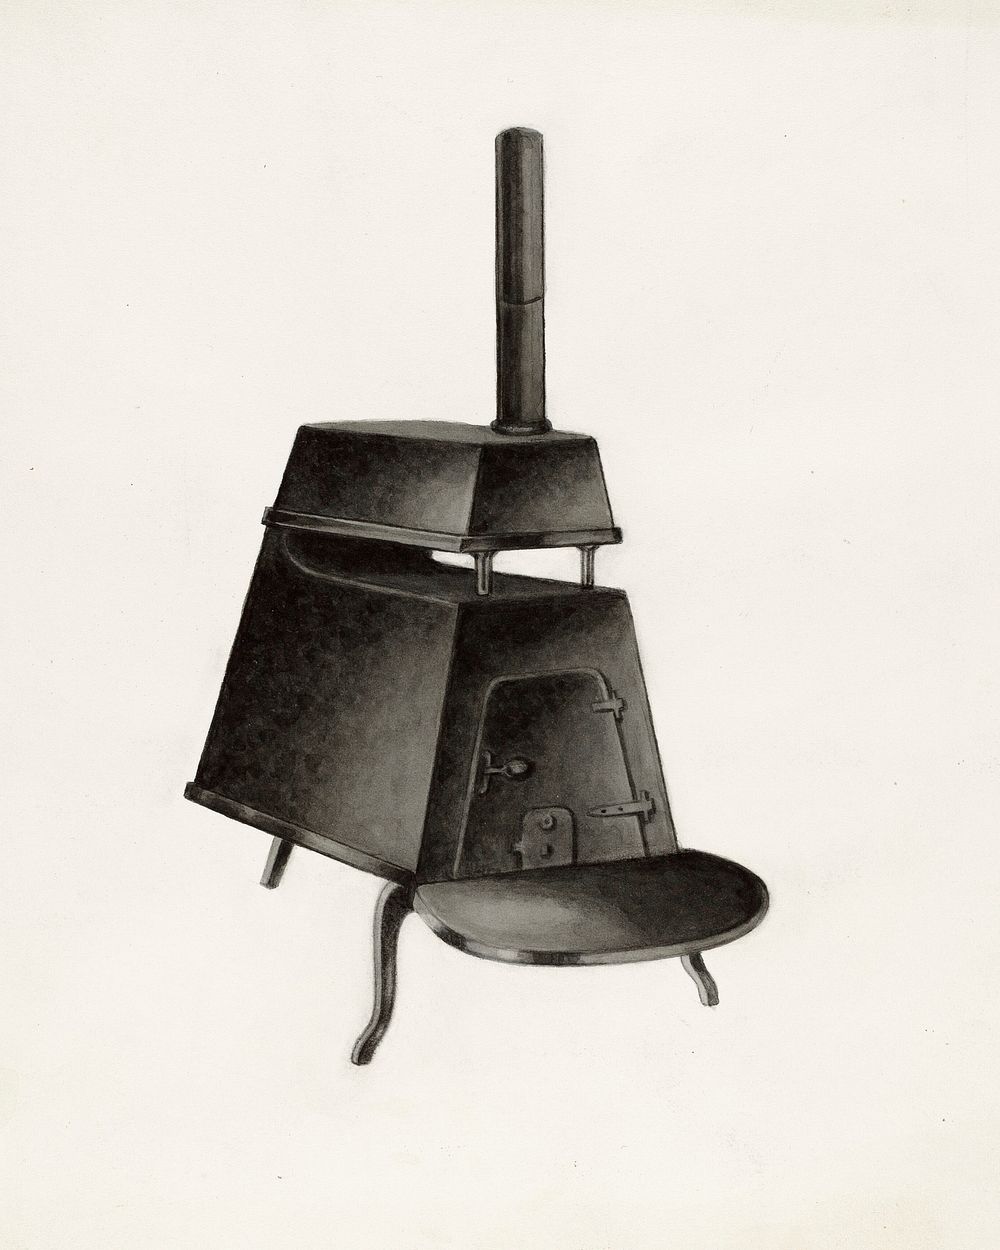 Shaker Stove (ca.1937) by George V. Vezolles. Original from The National Gallery of Art. Digitally enhanced by rawpixel.